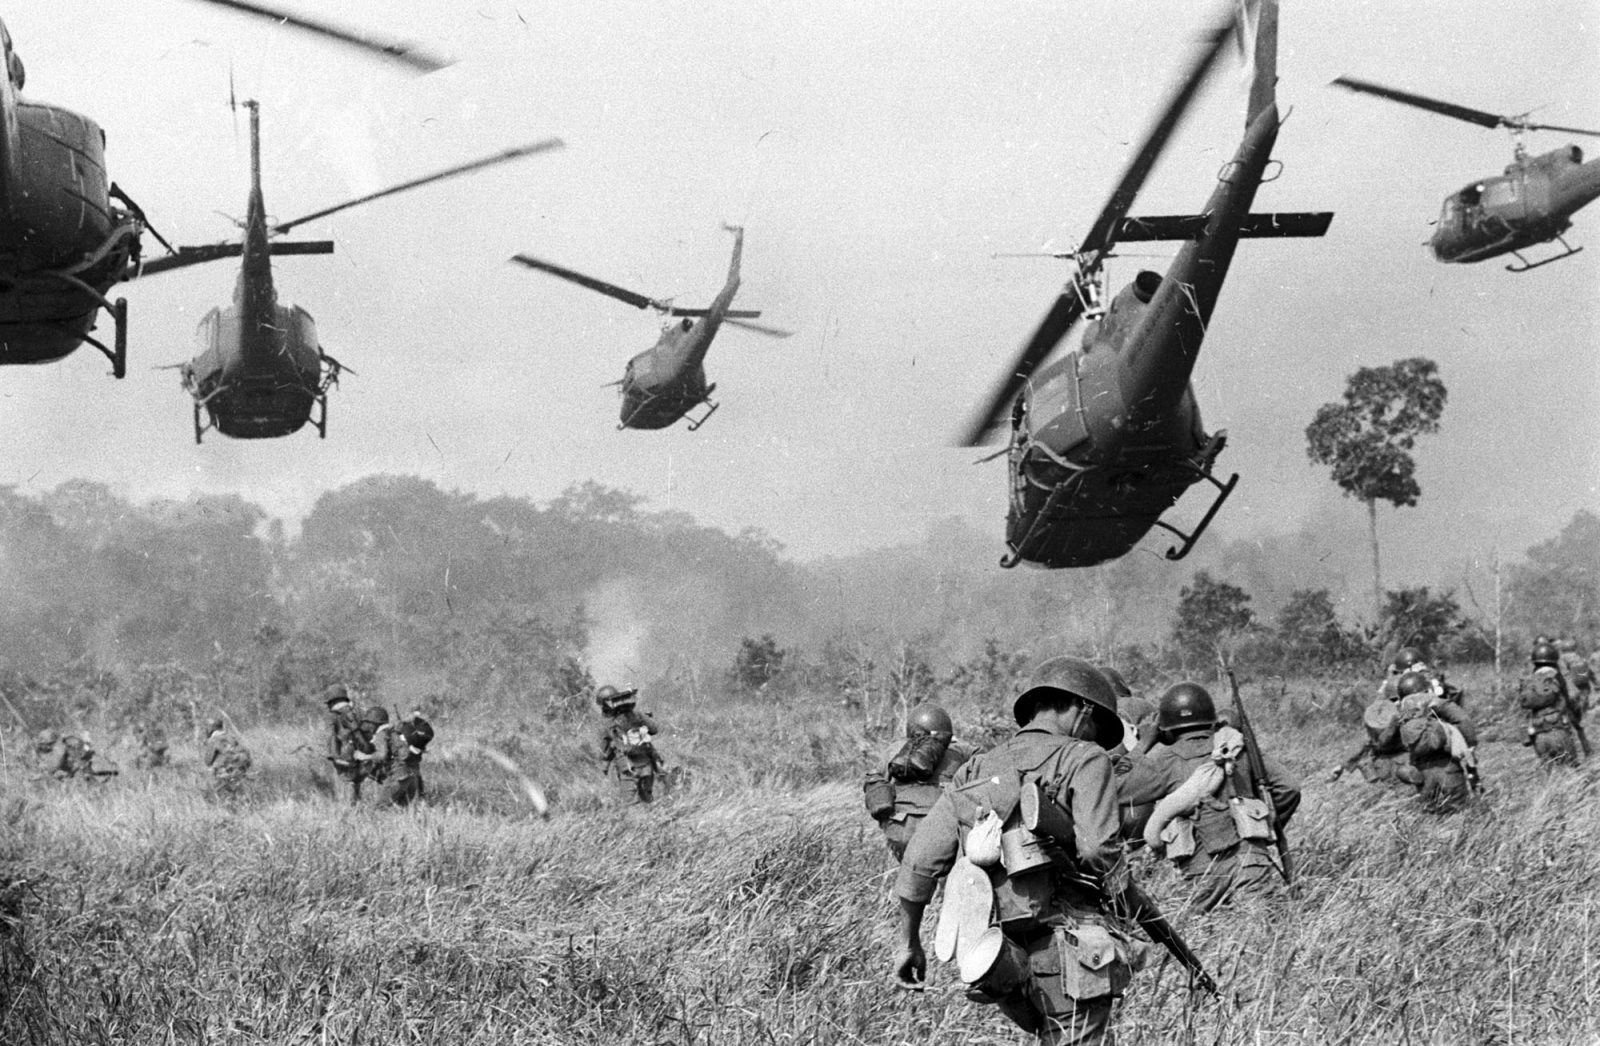 Can You Get an ‘A’ In This Middle School U.S. History Test? Vietnam War